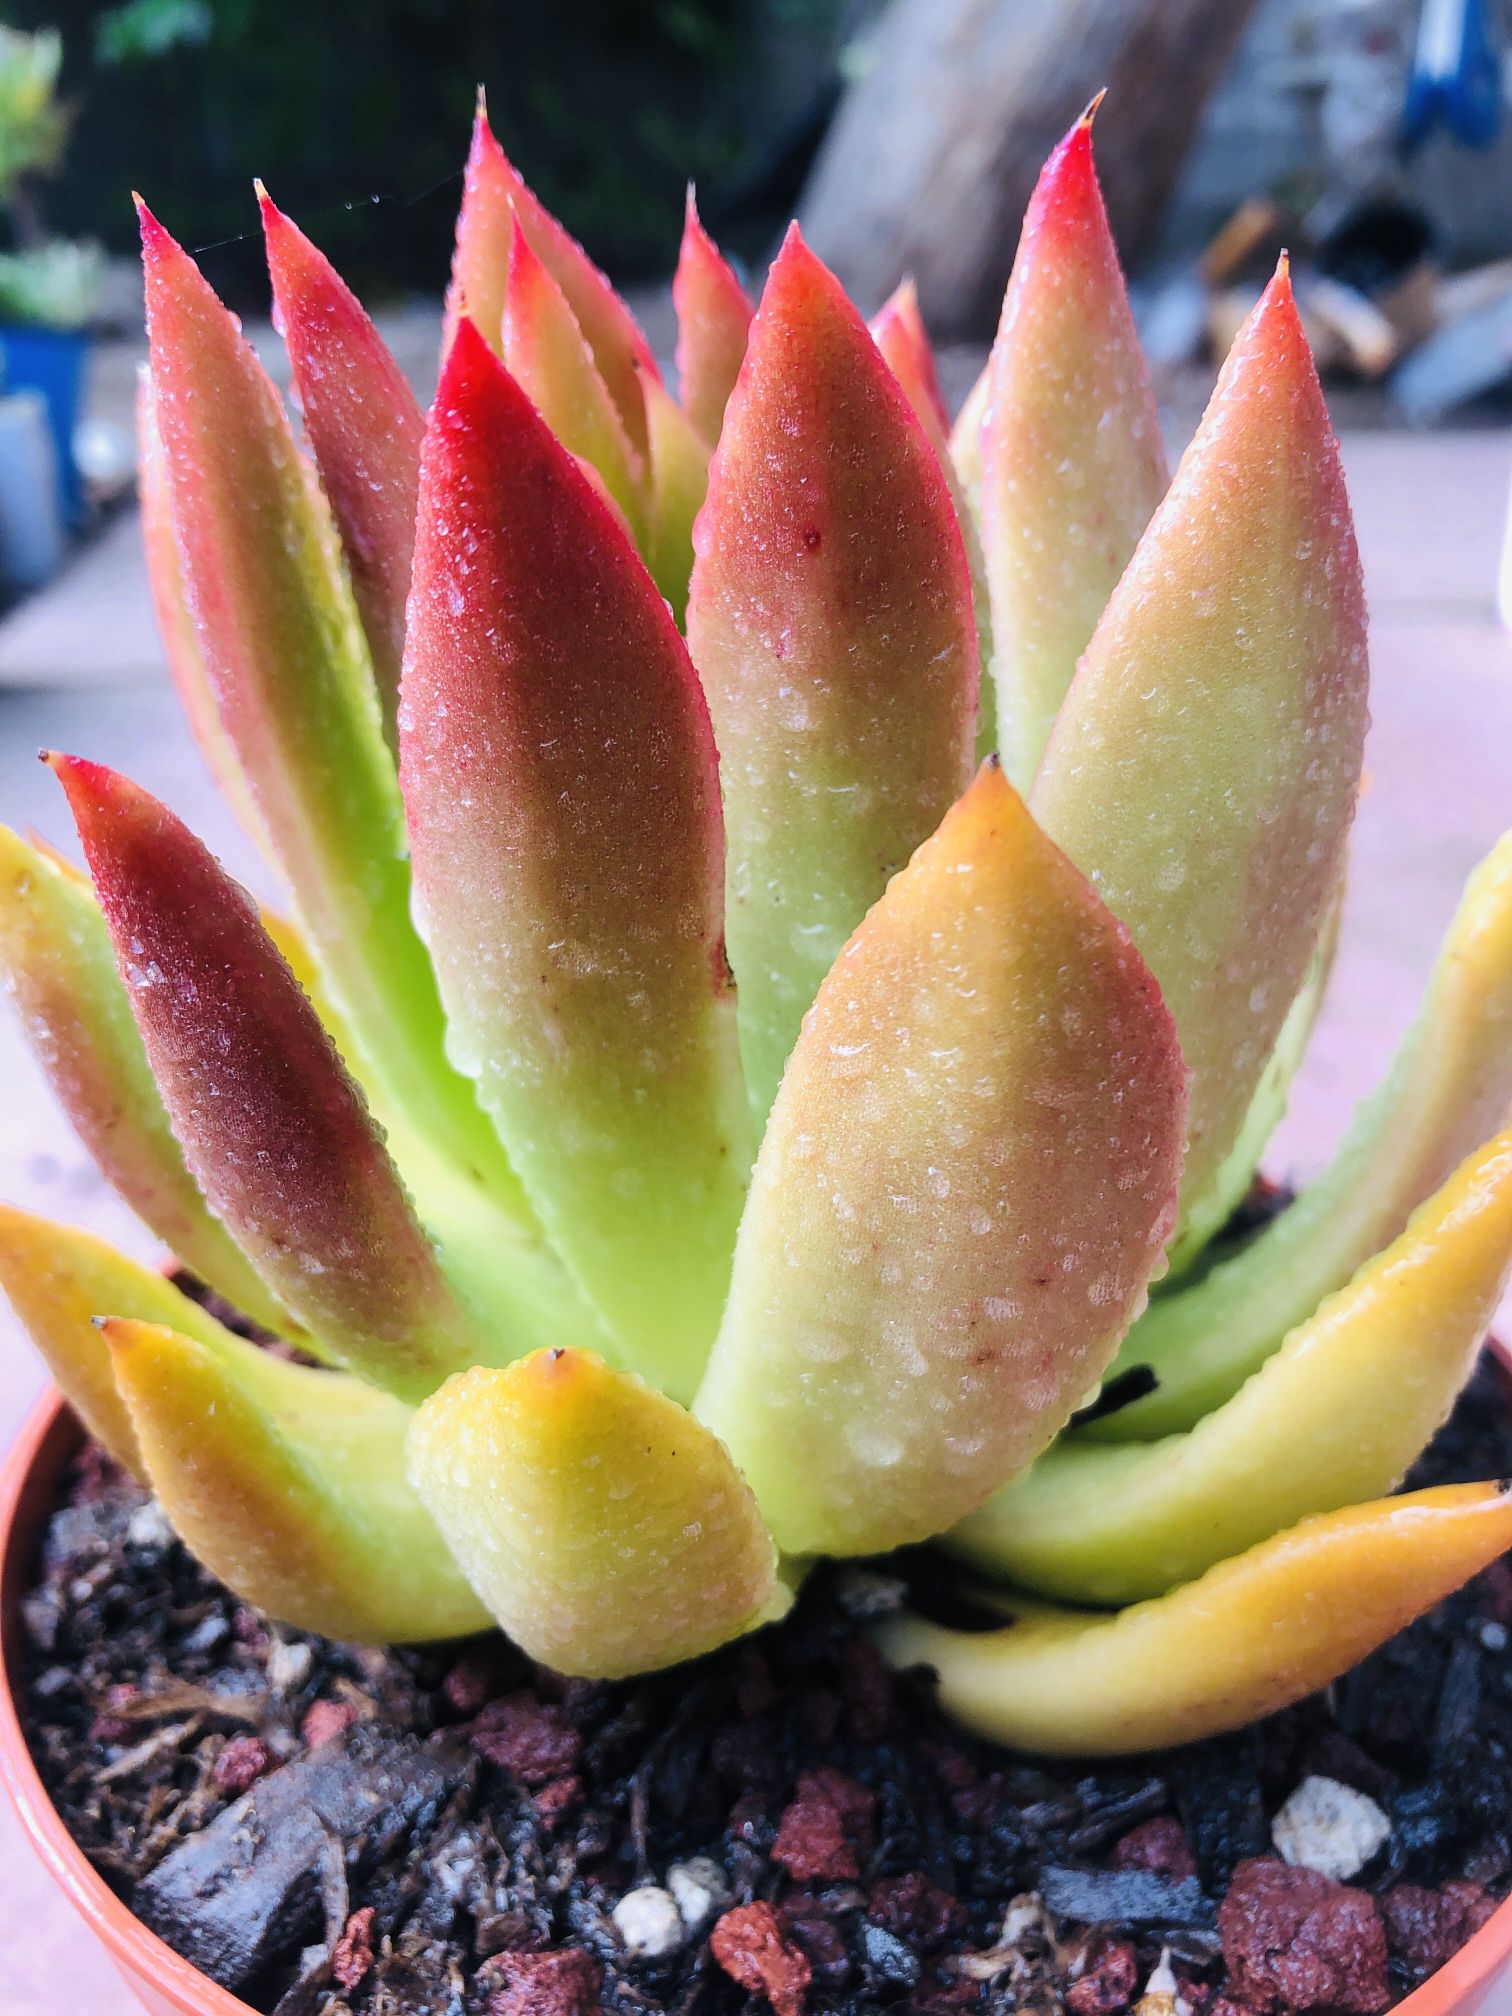 6" Echeveria agavoides Lemaire Succulent live rooted